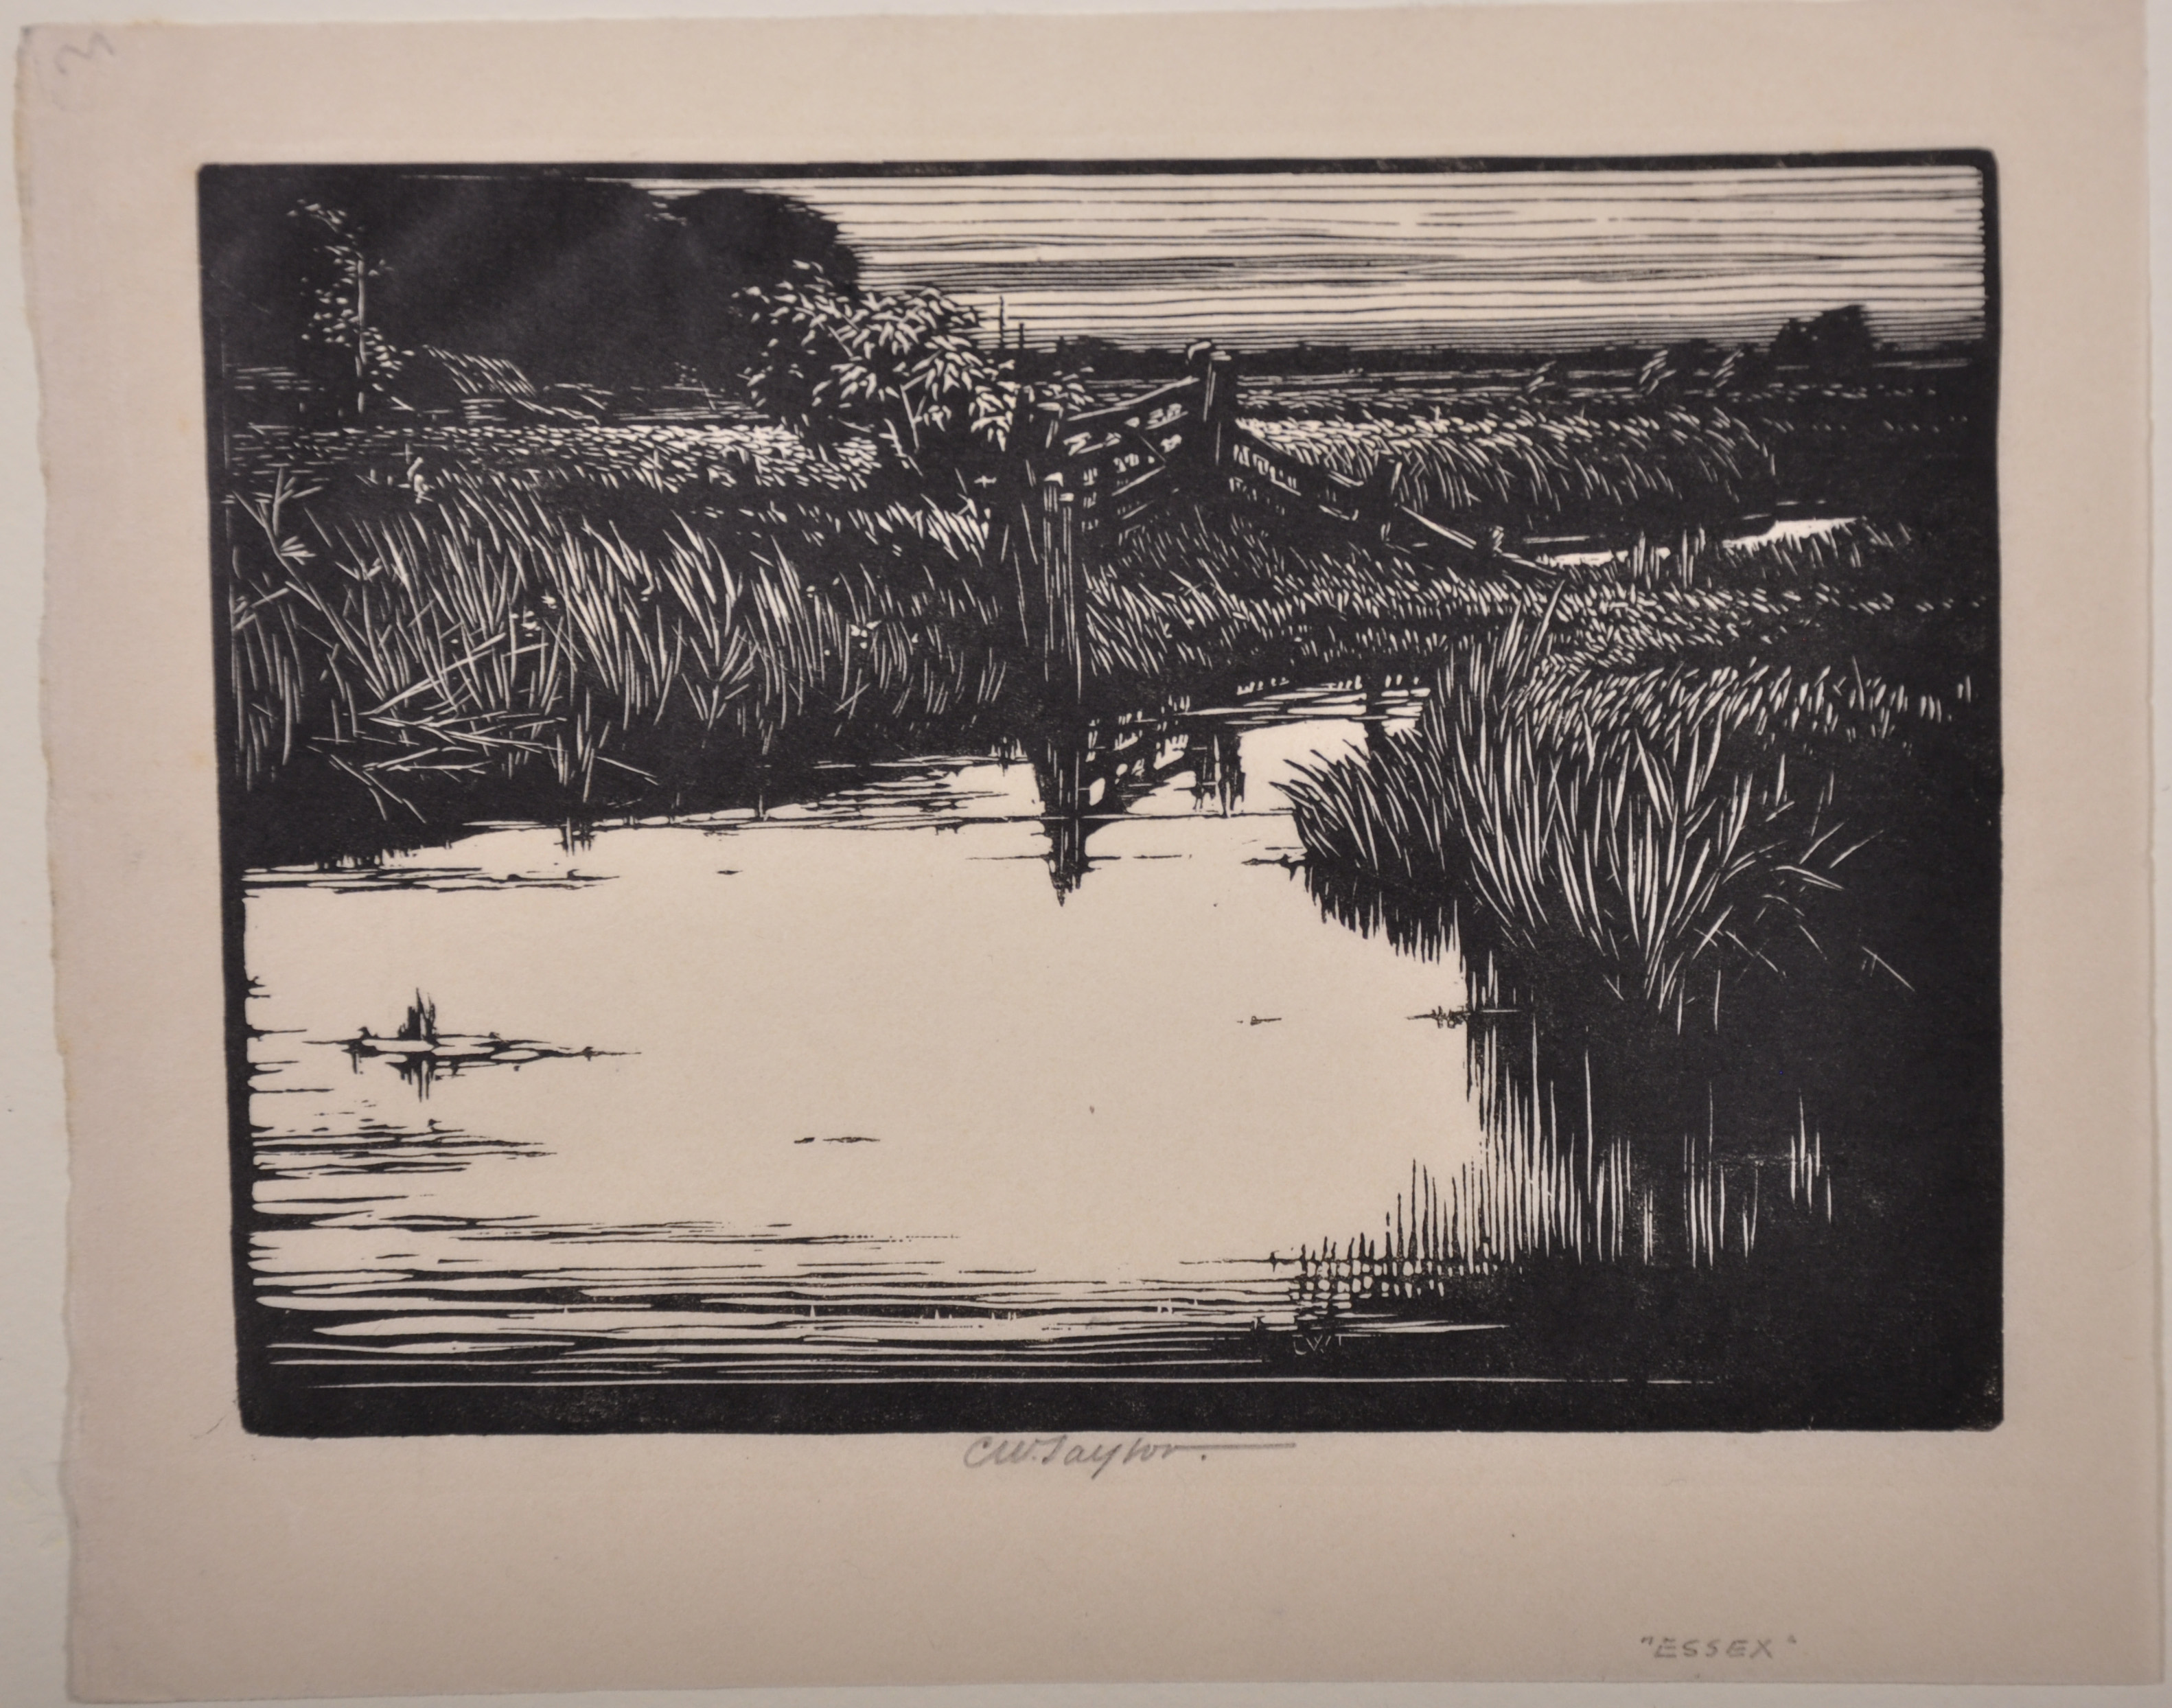 Charles William Taylor (1878-1960) British. “Essex”, Woodcut, Signed and Inscribed in Pencil, - Image 3 of 6